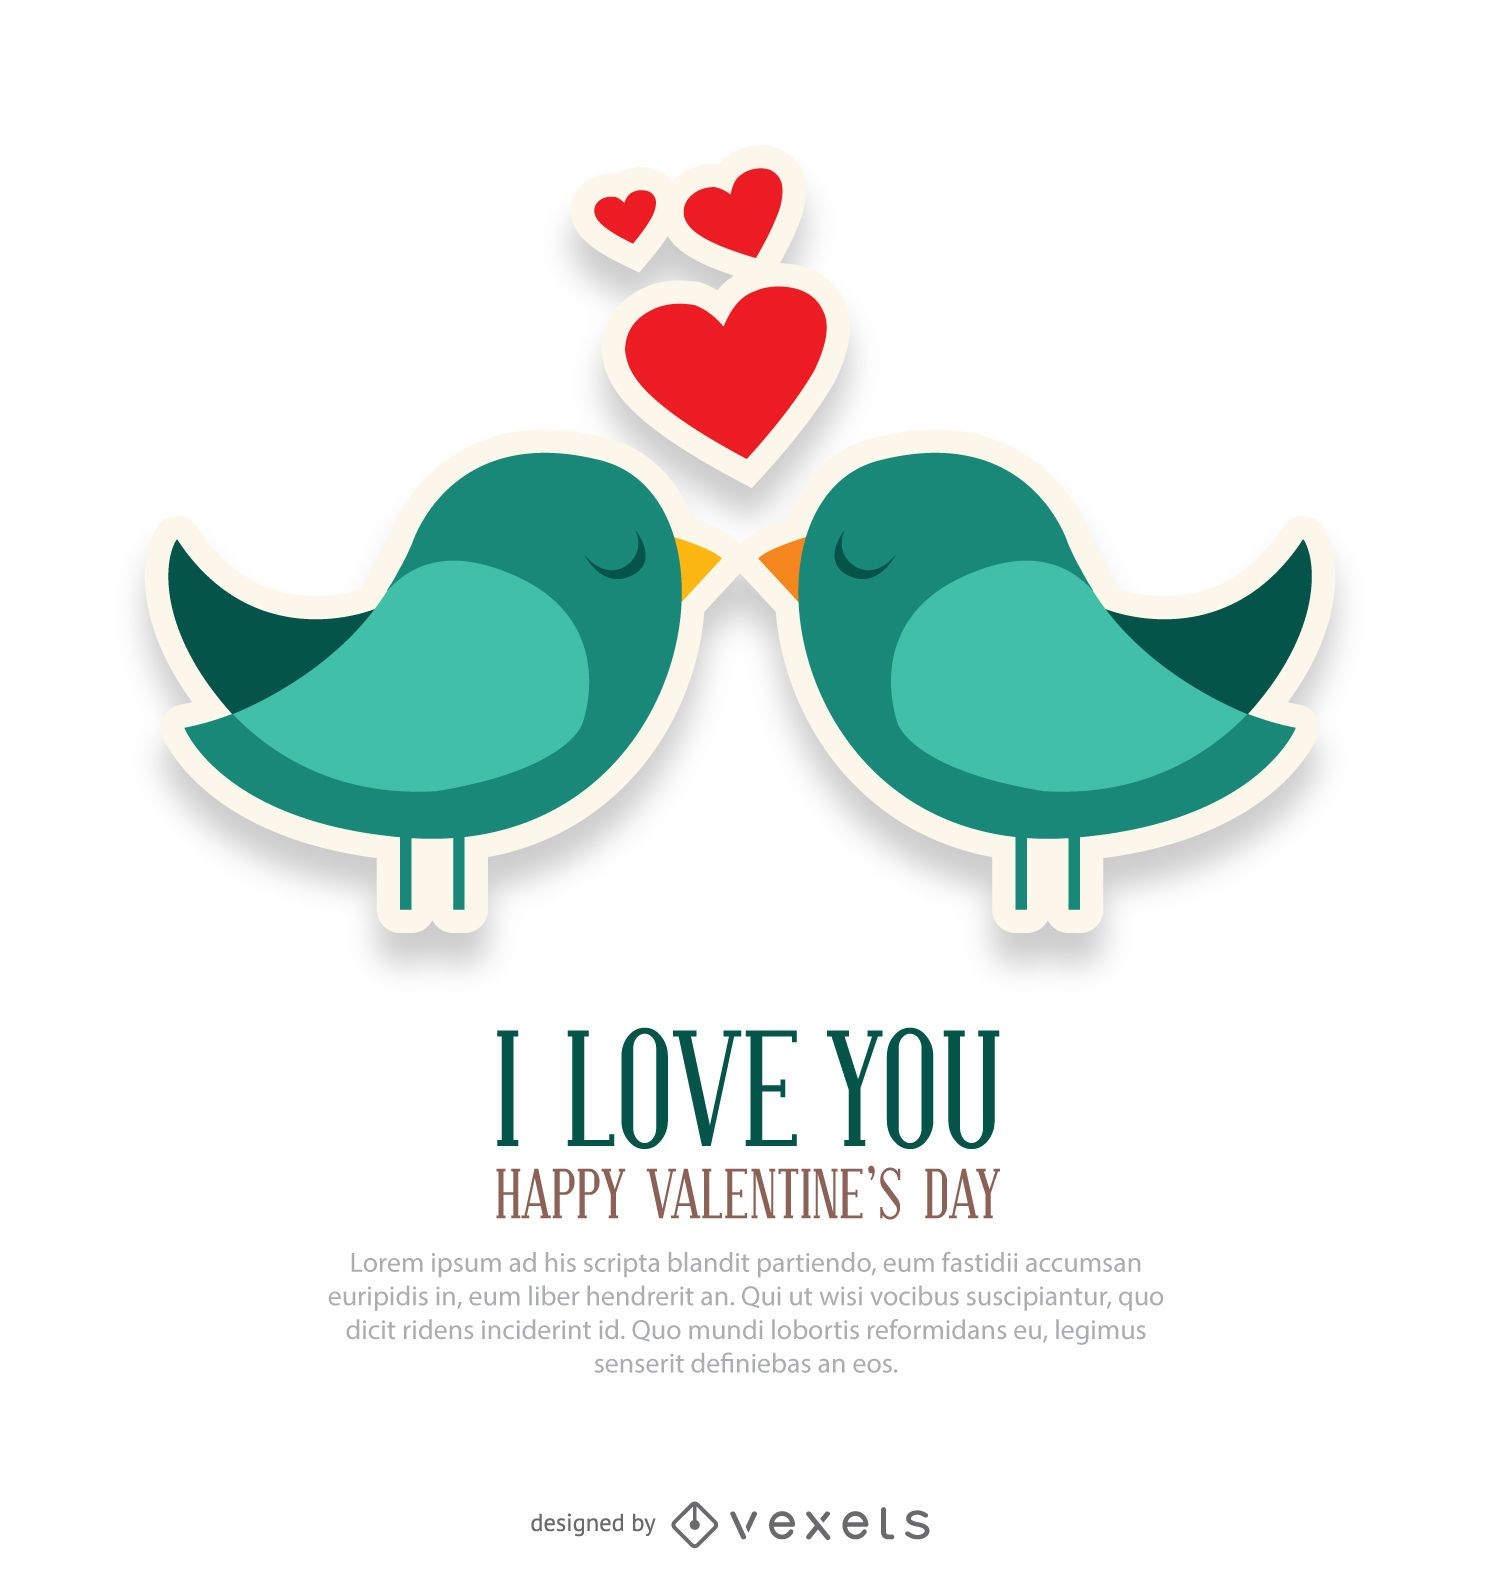 I love you and birds card - Vector download1500 x 1577